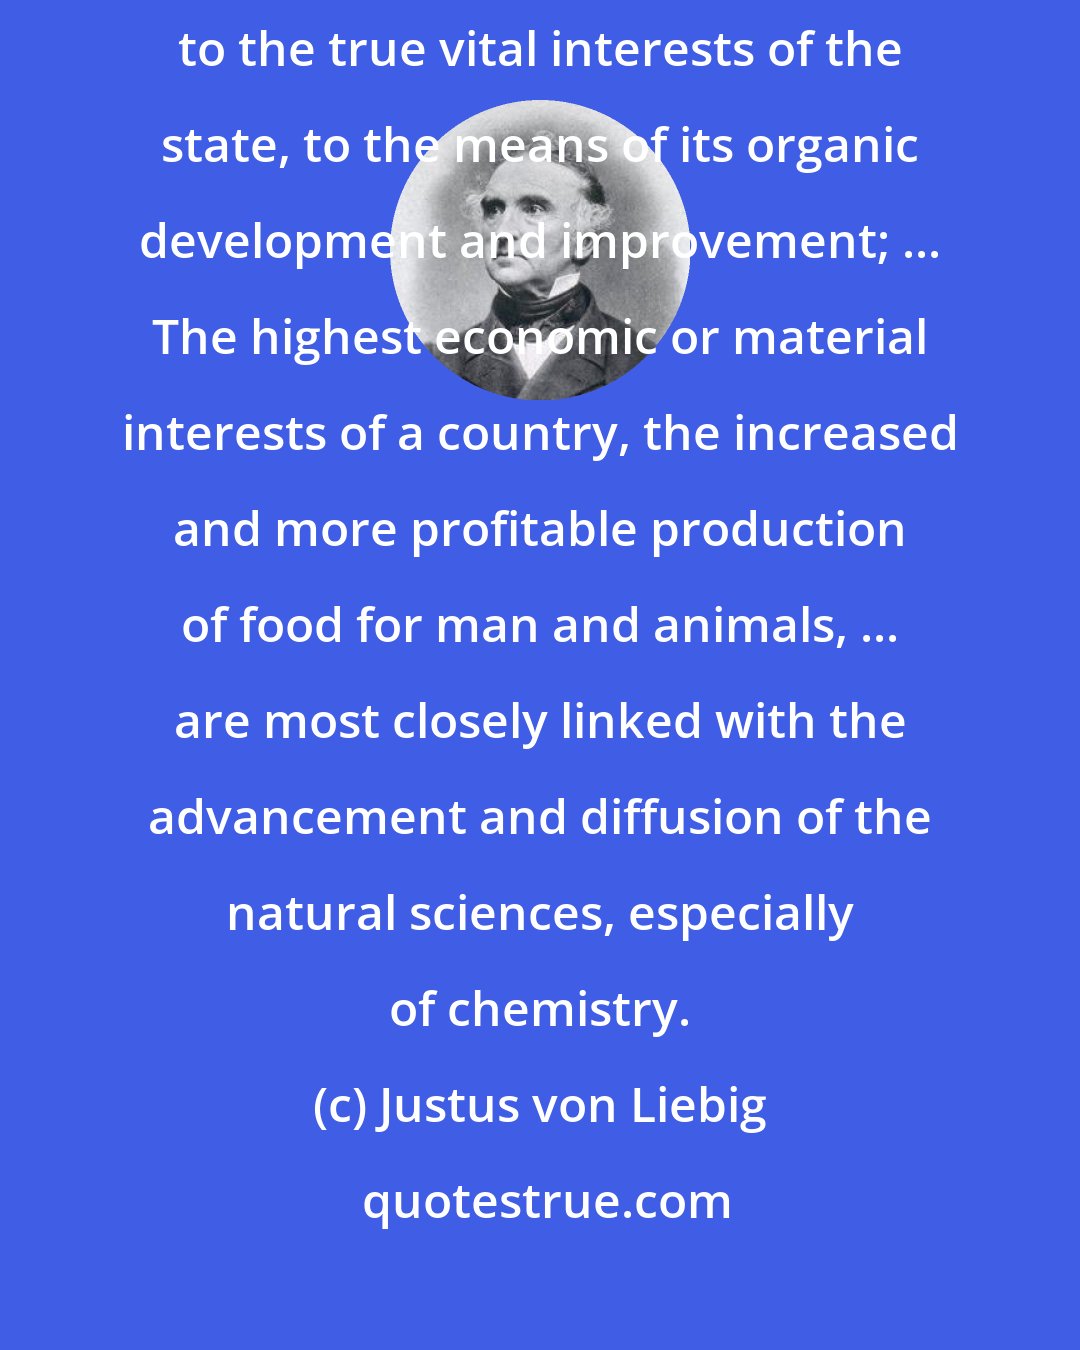 Justus von Liebig: Without an acquaintance with chemistry, the statesman must remain a stranger to the true vital interests of the state, to the means of its organic development and improvement; ... The highest economic or material interests of a country, the increased and more profitable production of food for man and animals, ... are most closely linked with the advancement and diffusion of the natural sciences, especially of chemistry.